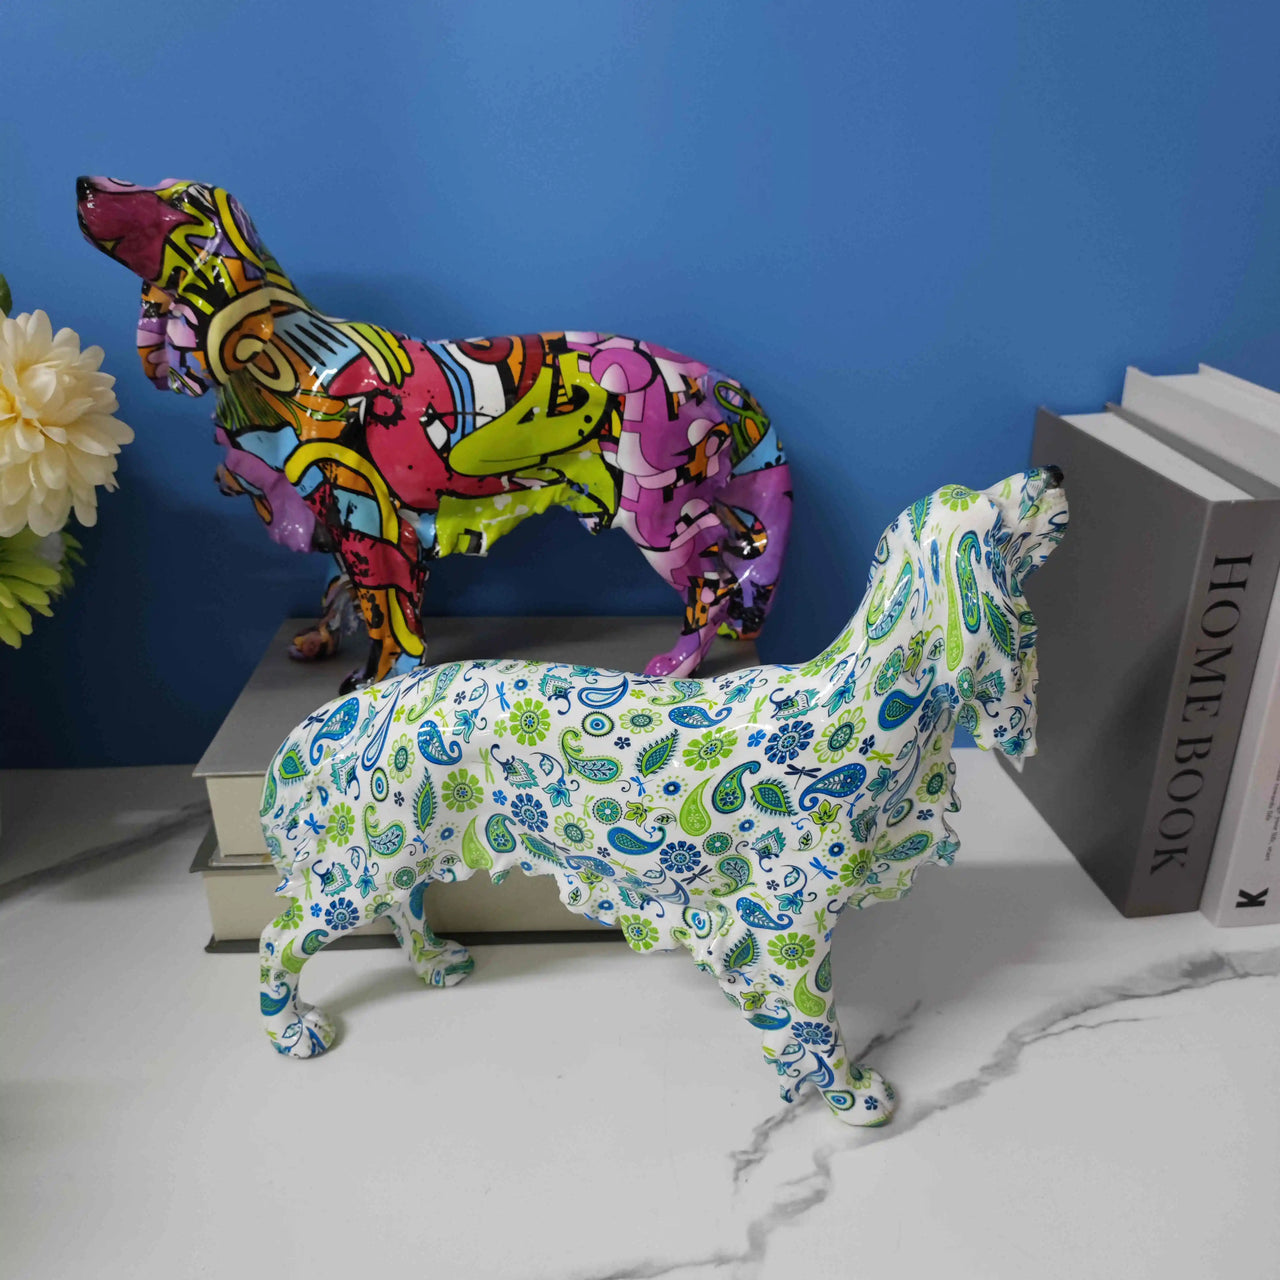 Modern Graffiti Painted Dachshund Dog Office Decoration Craft Sculptures and Statues